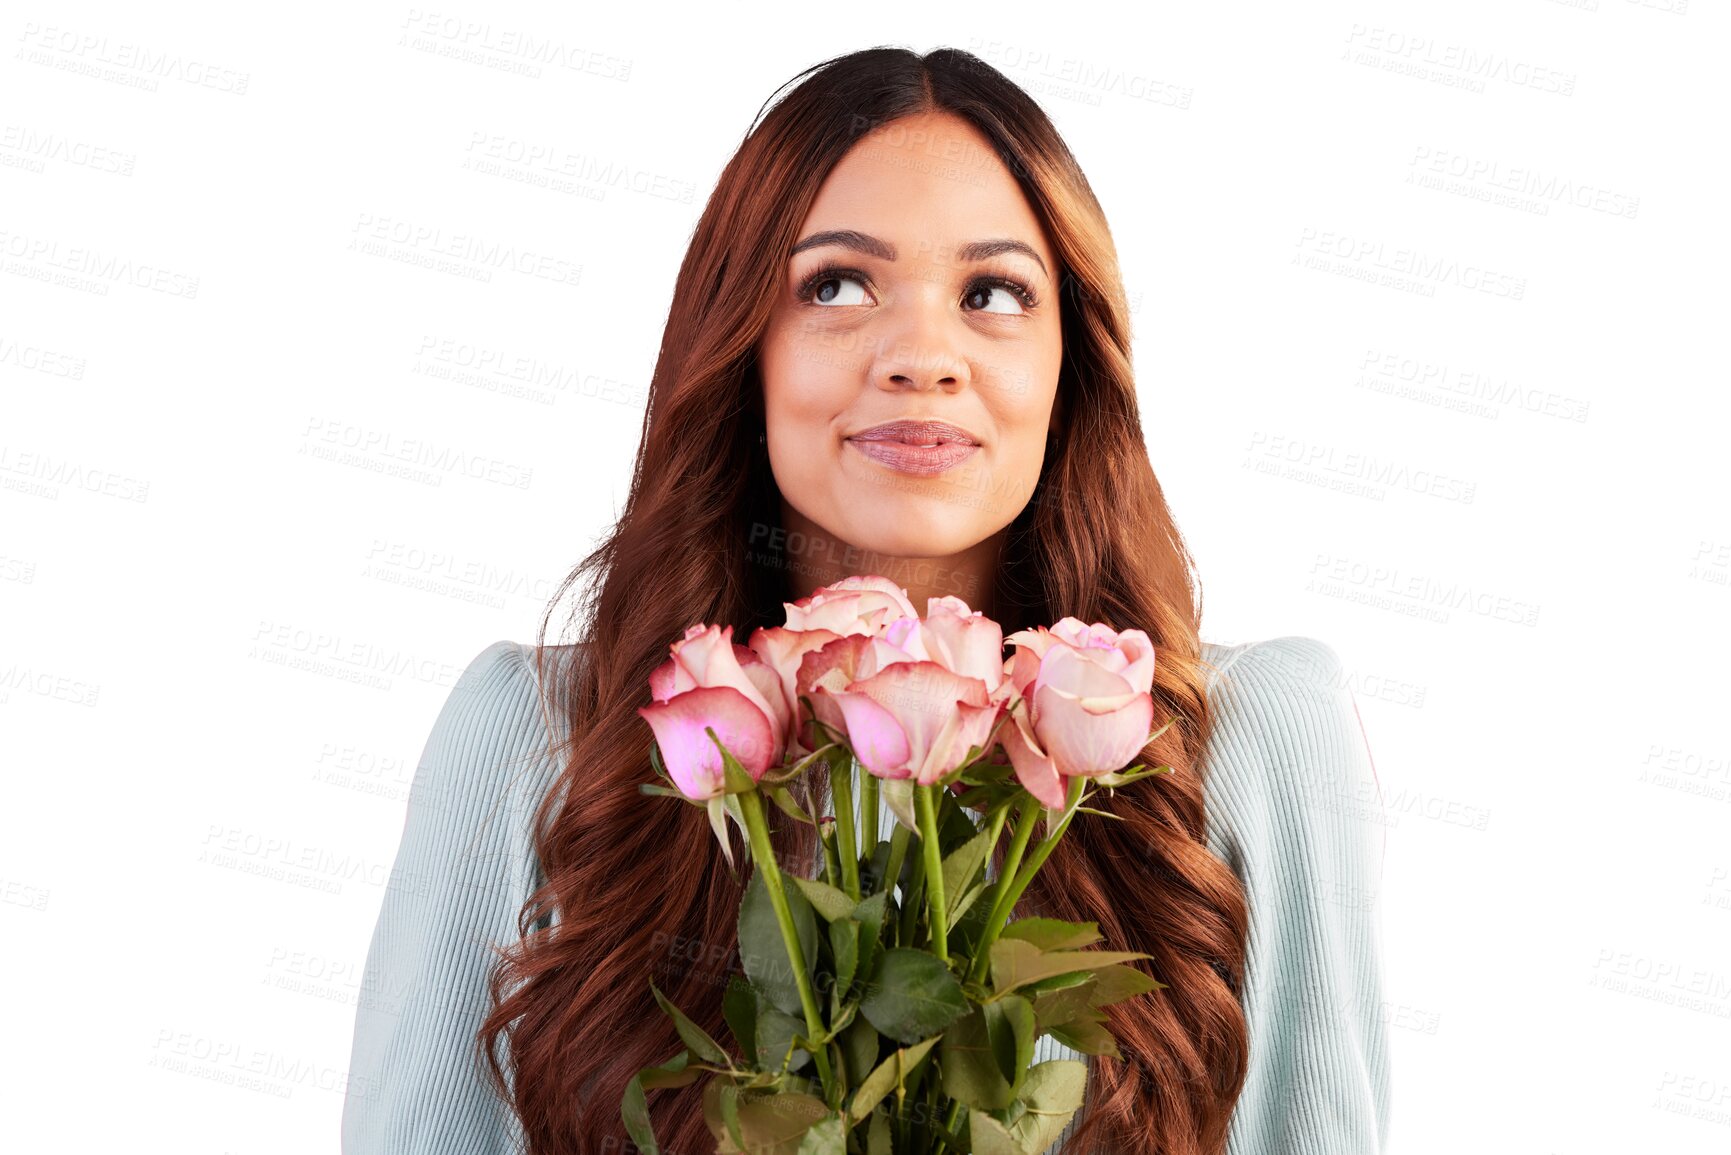 Buy stock photo Happy, woman and thinking with roses for valentines day, romance or anniversary isolated on a transparent PNG background. Thoughtful young female person smile in happiness with bouquet of flowers